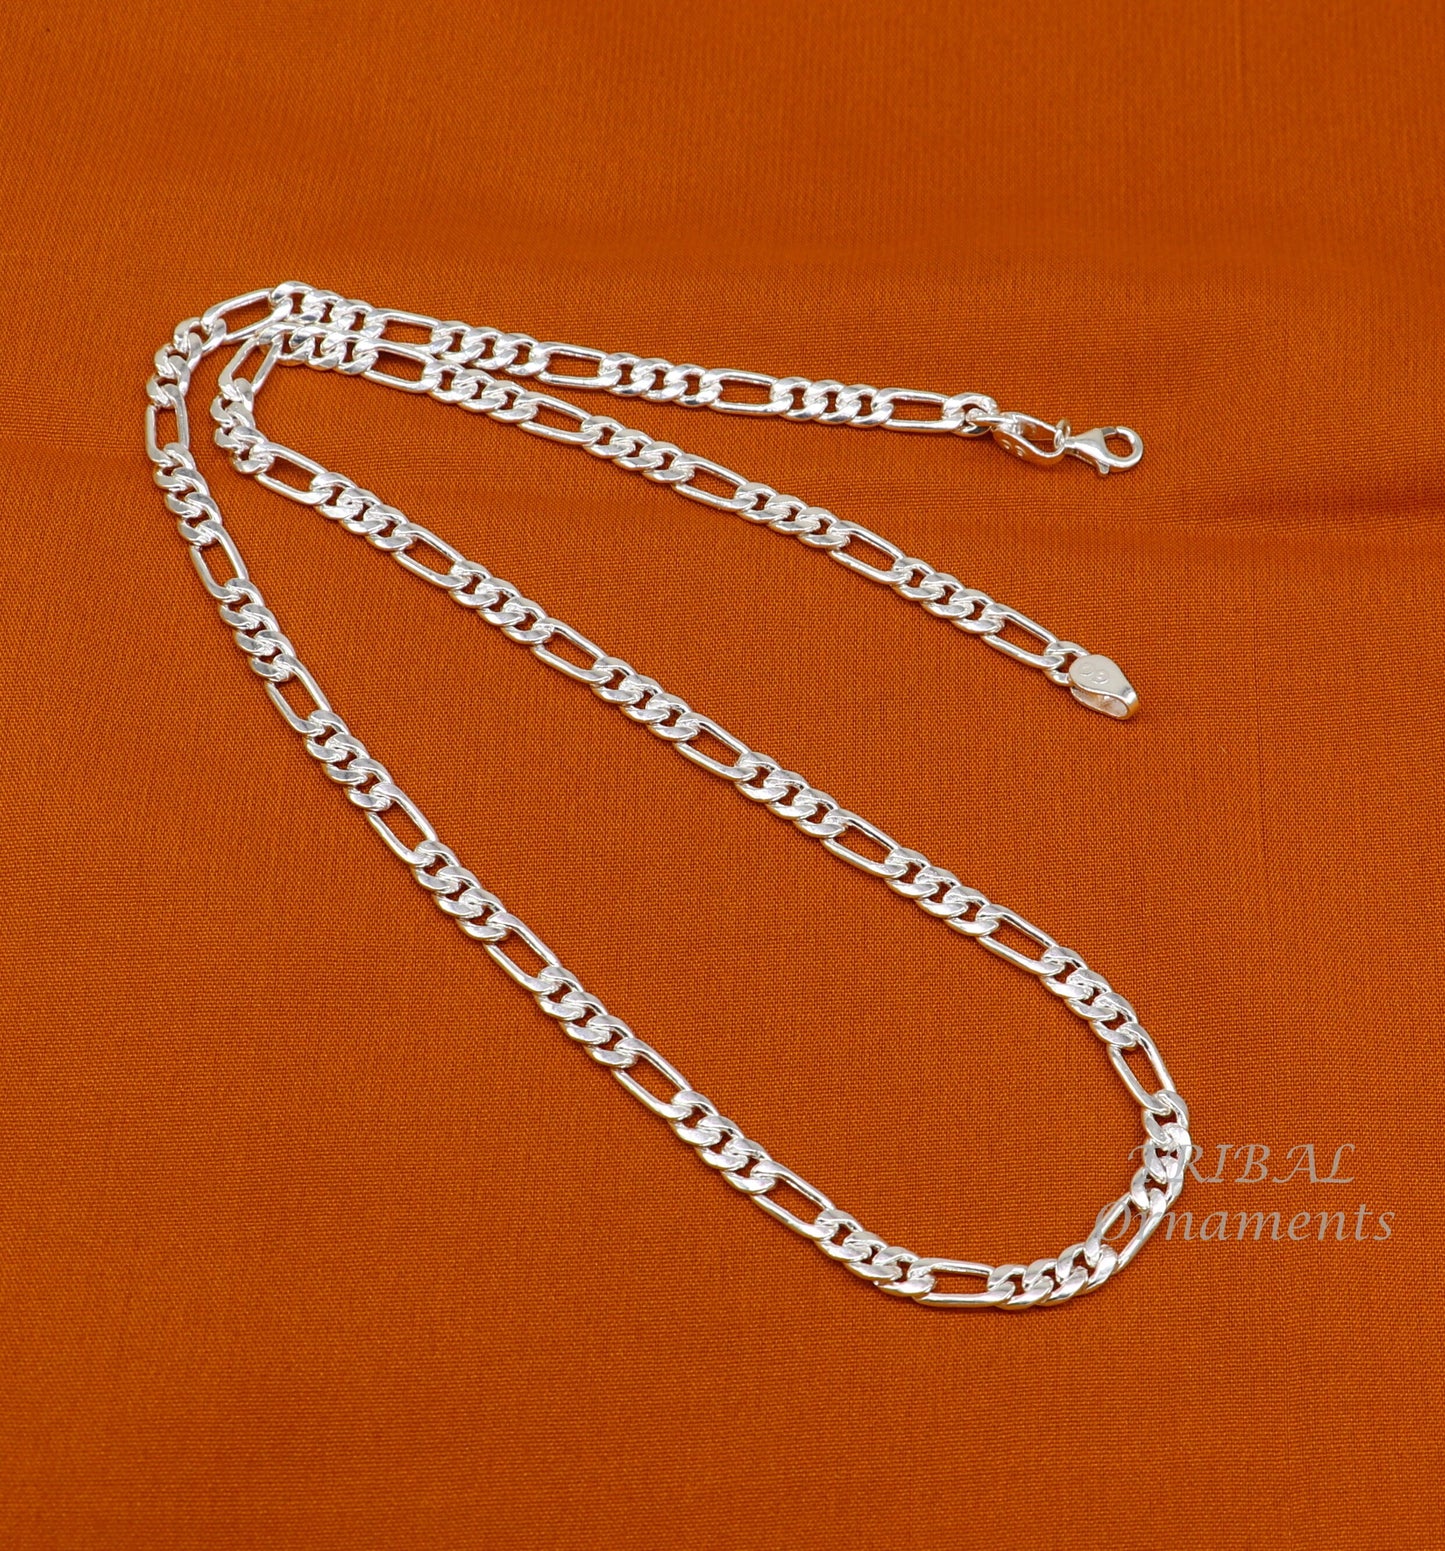 925 sterling silver 20 inches long 4mm handmade amazing figaro chain necklace excellent gifting jewelry from Rajasthan india nch173 - TRIBAL ORNAMENTS